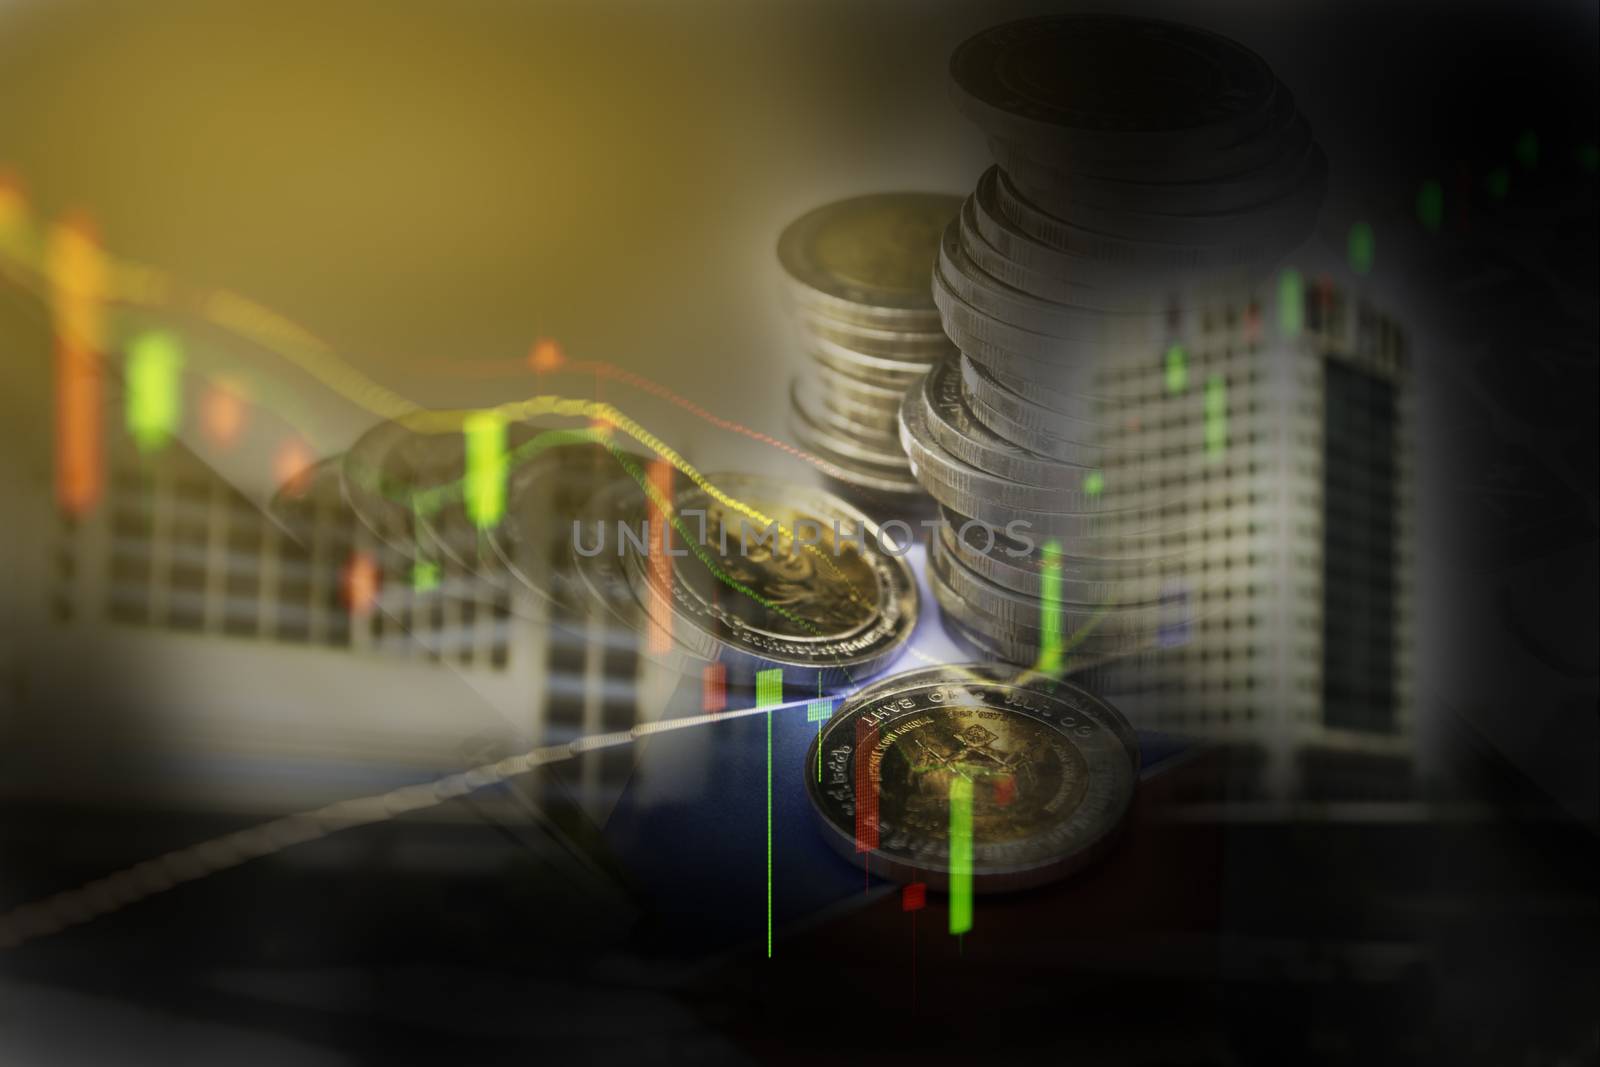 Double exposure stock financial indices with stack coin. Financial stock market in accounting market economy analysis.